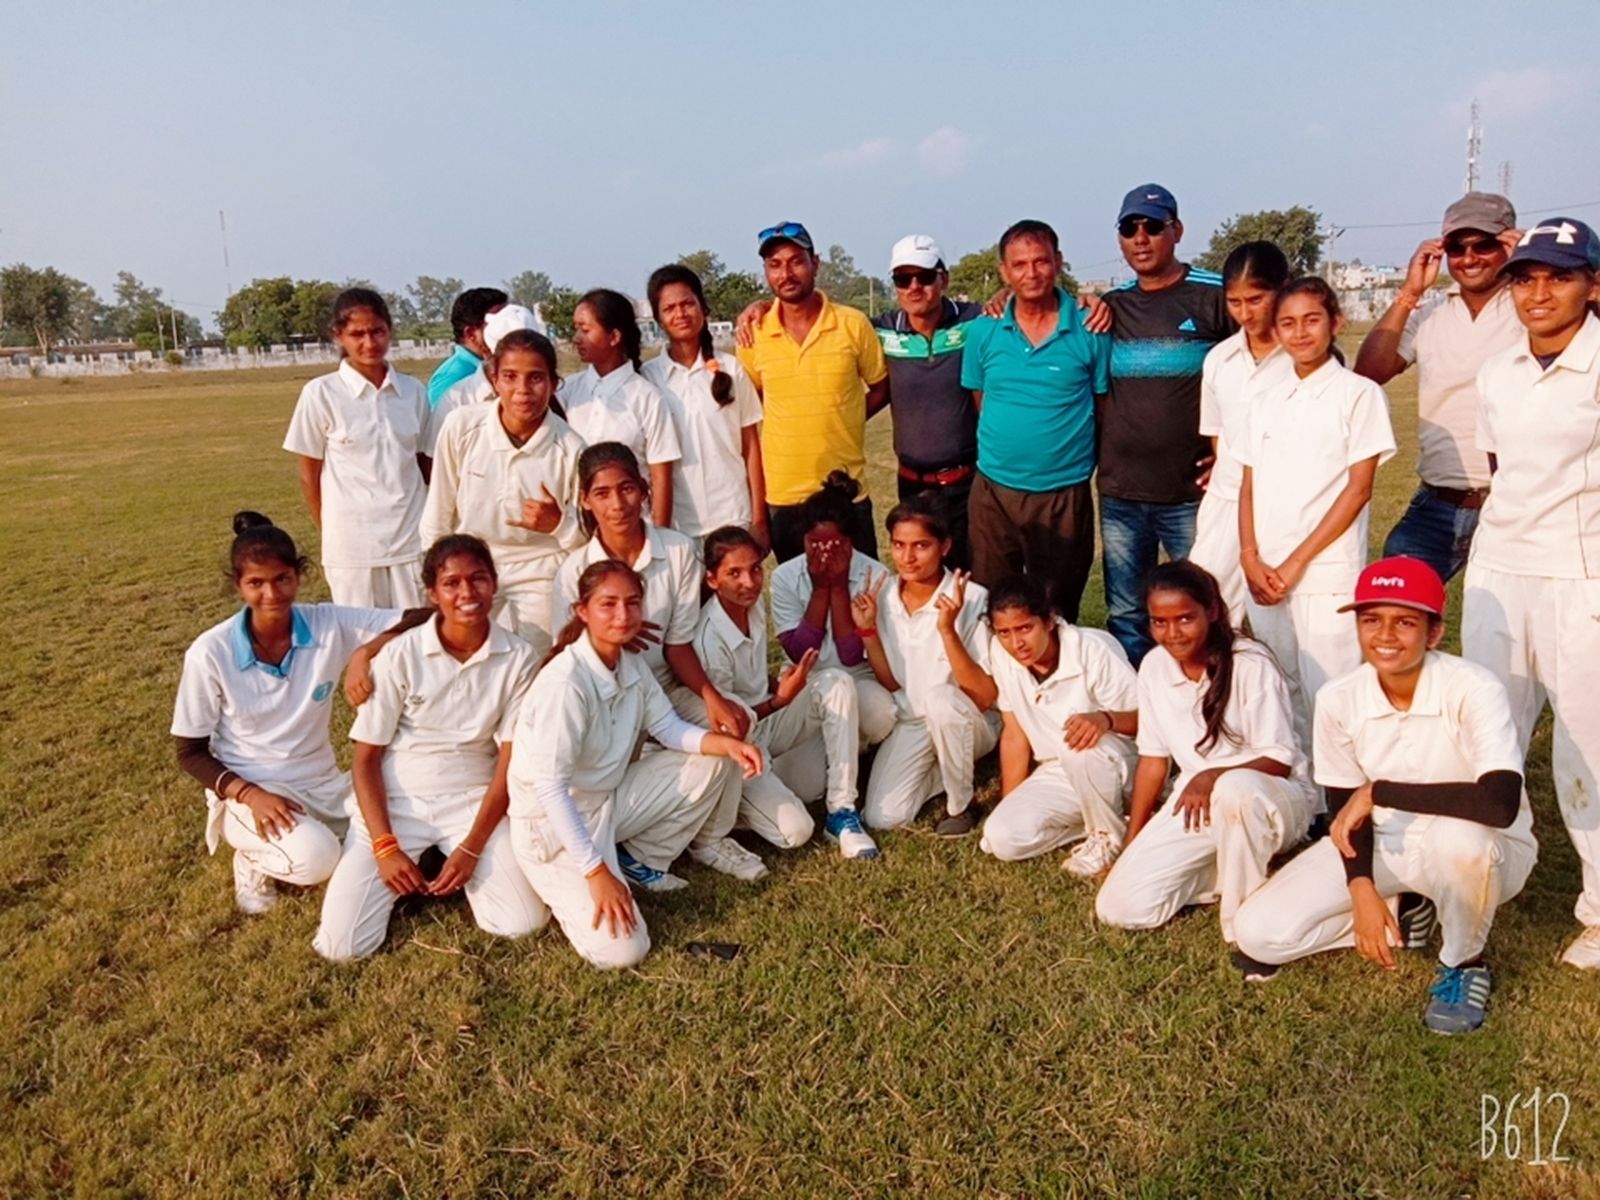 The daughters of this school showed their strength in cricket